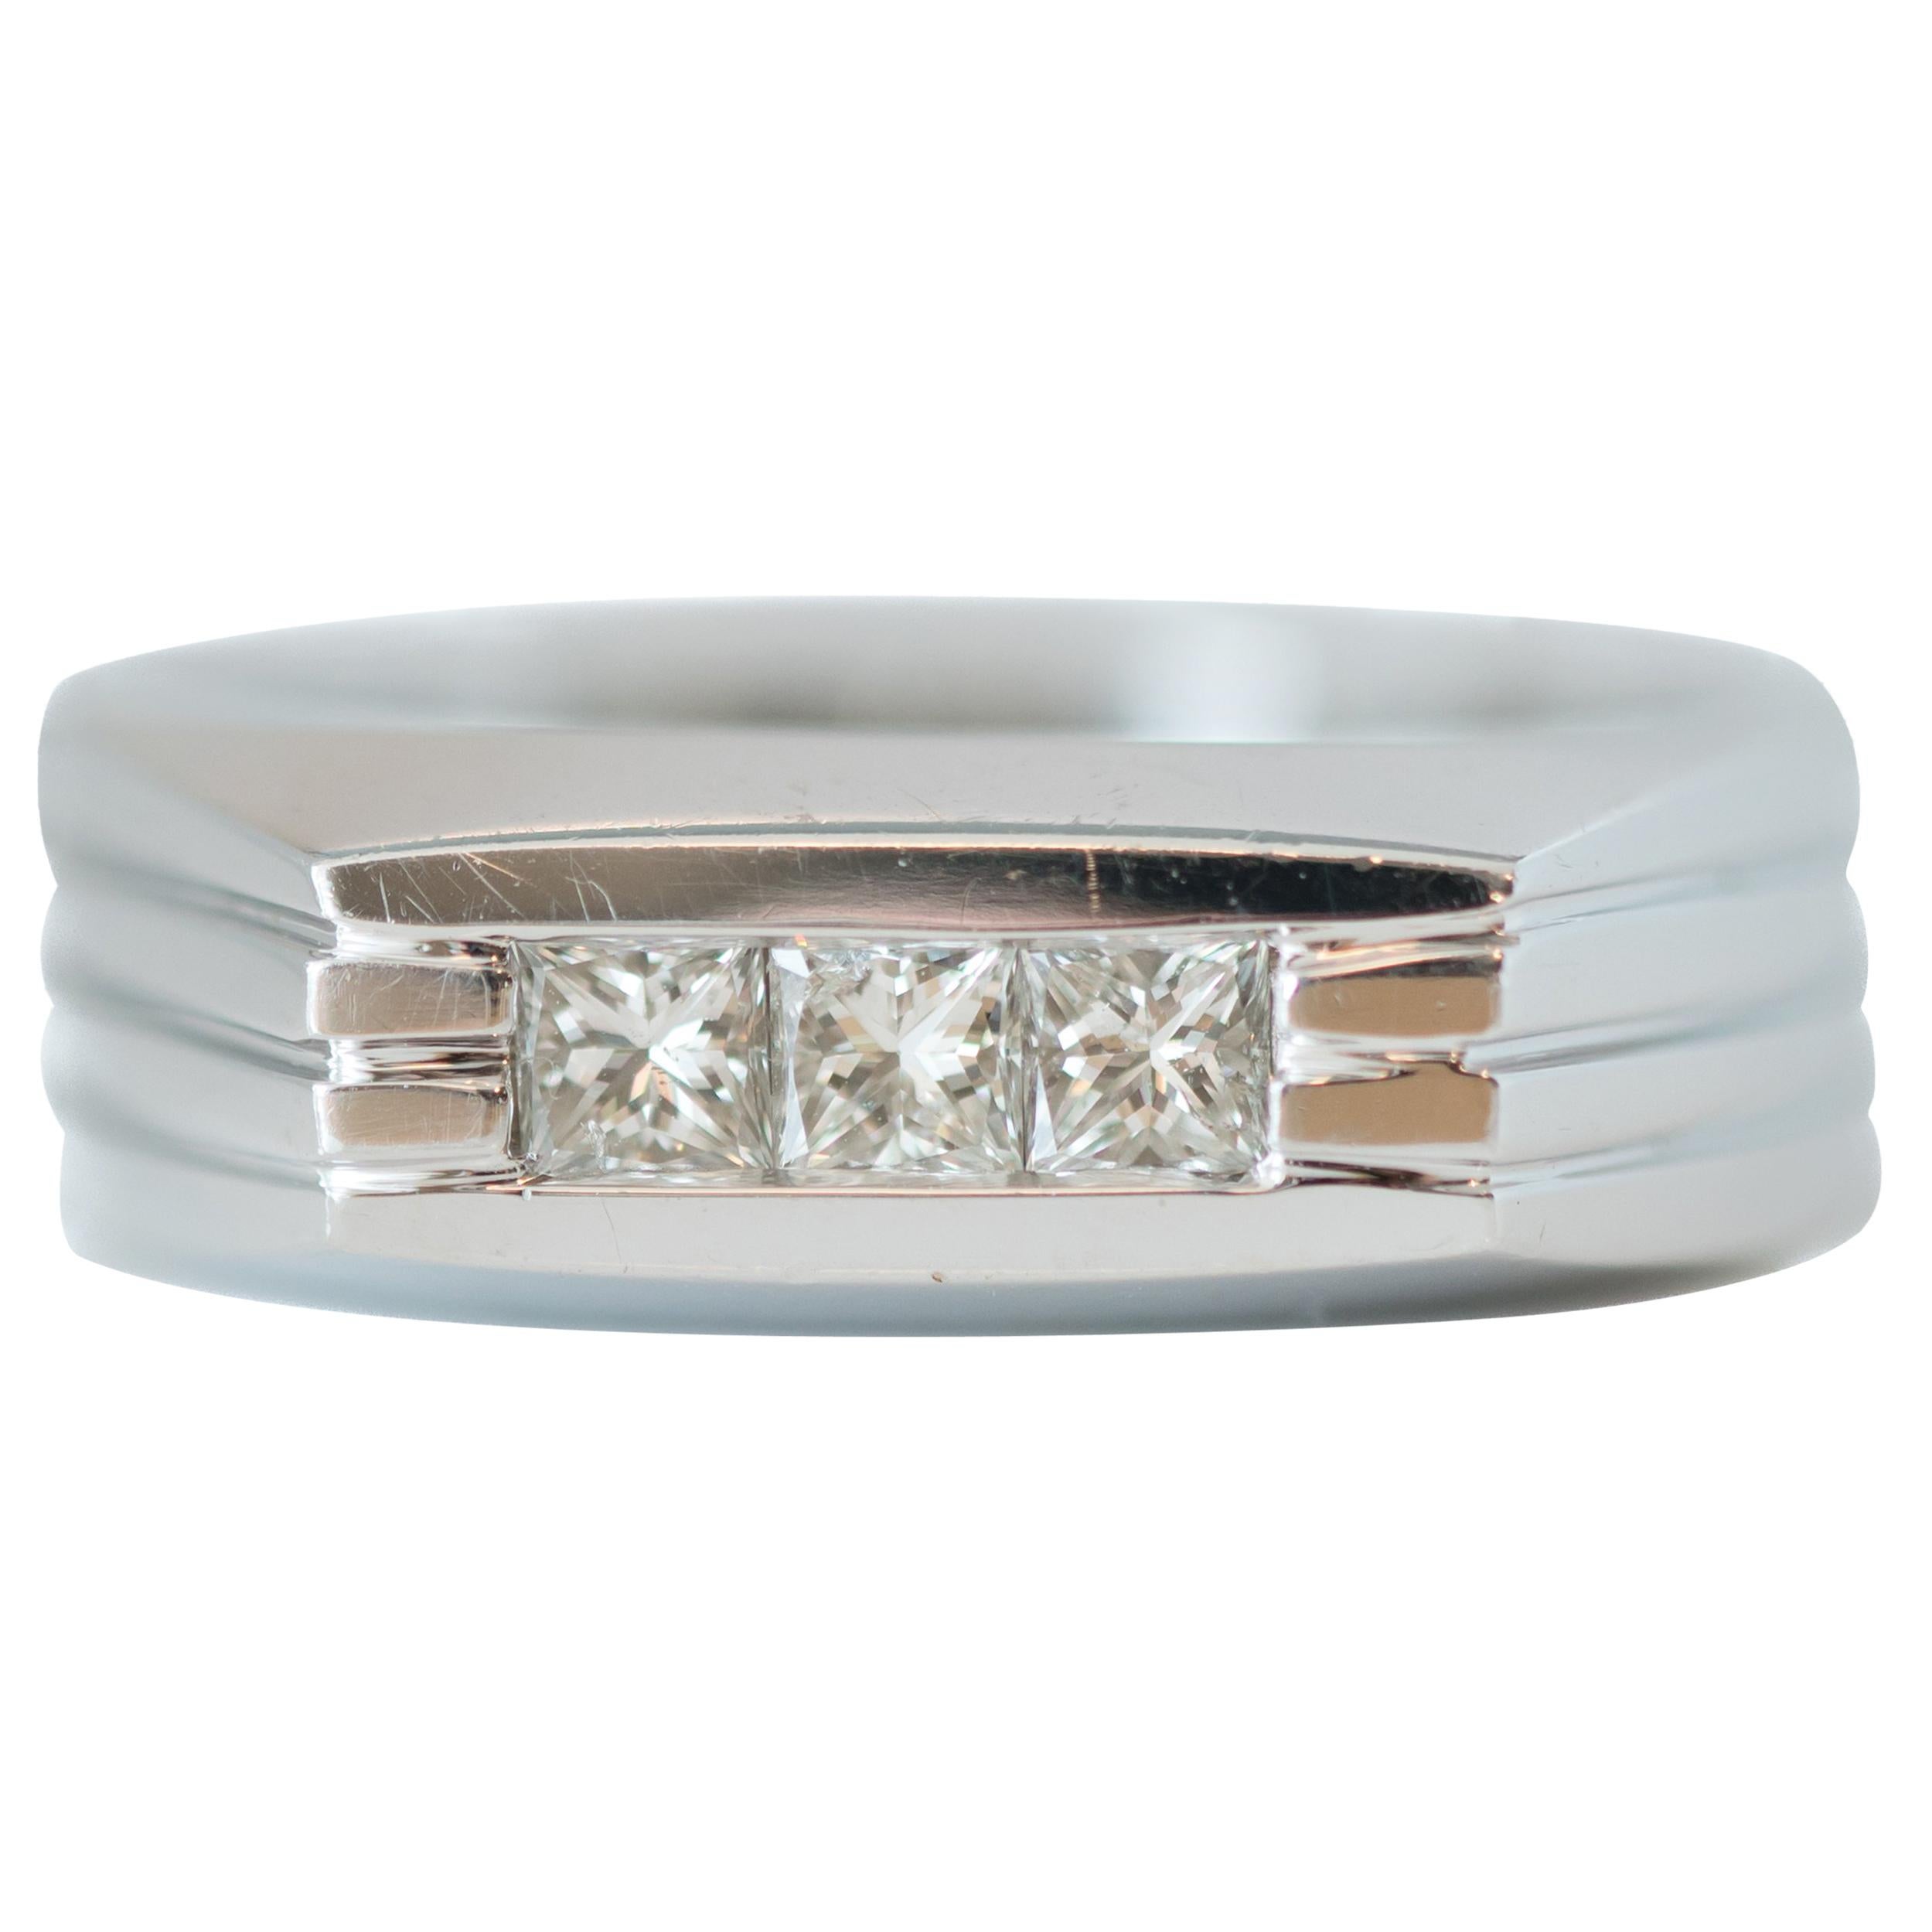 1950s 0.35 Carat Diamond and 14 Karat White Gold Band Ring For Sale